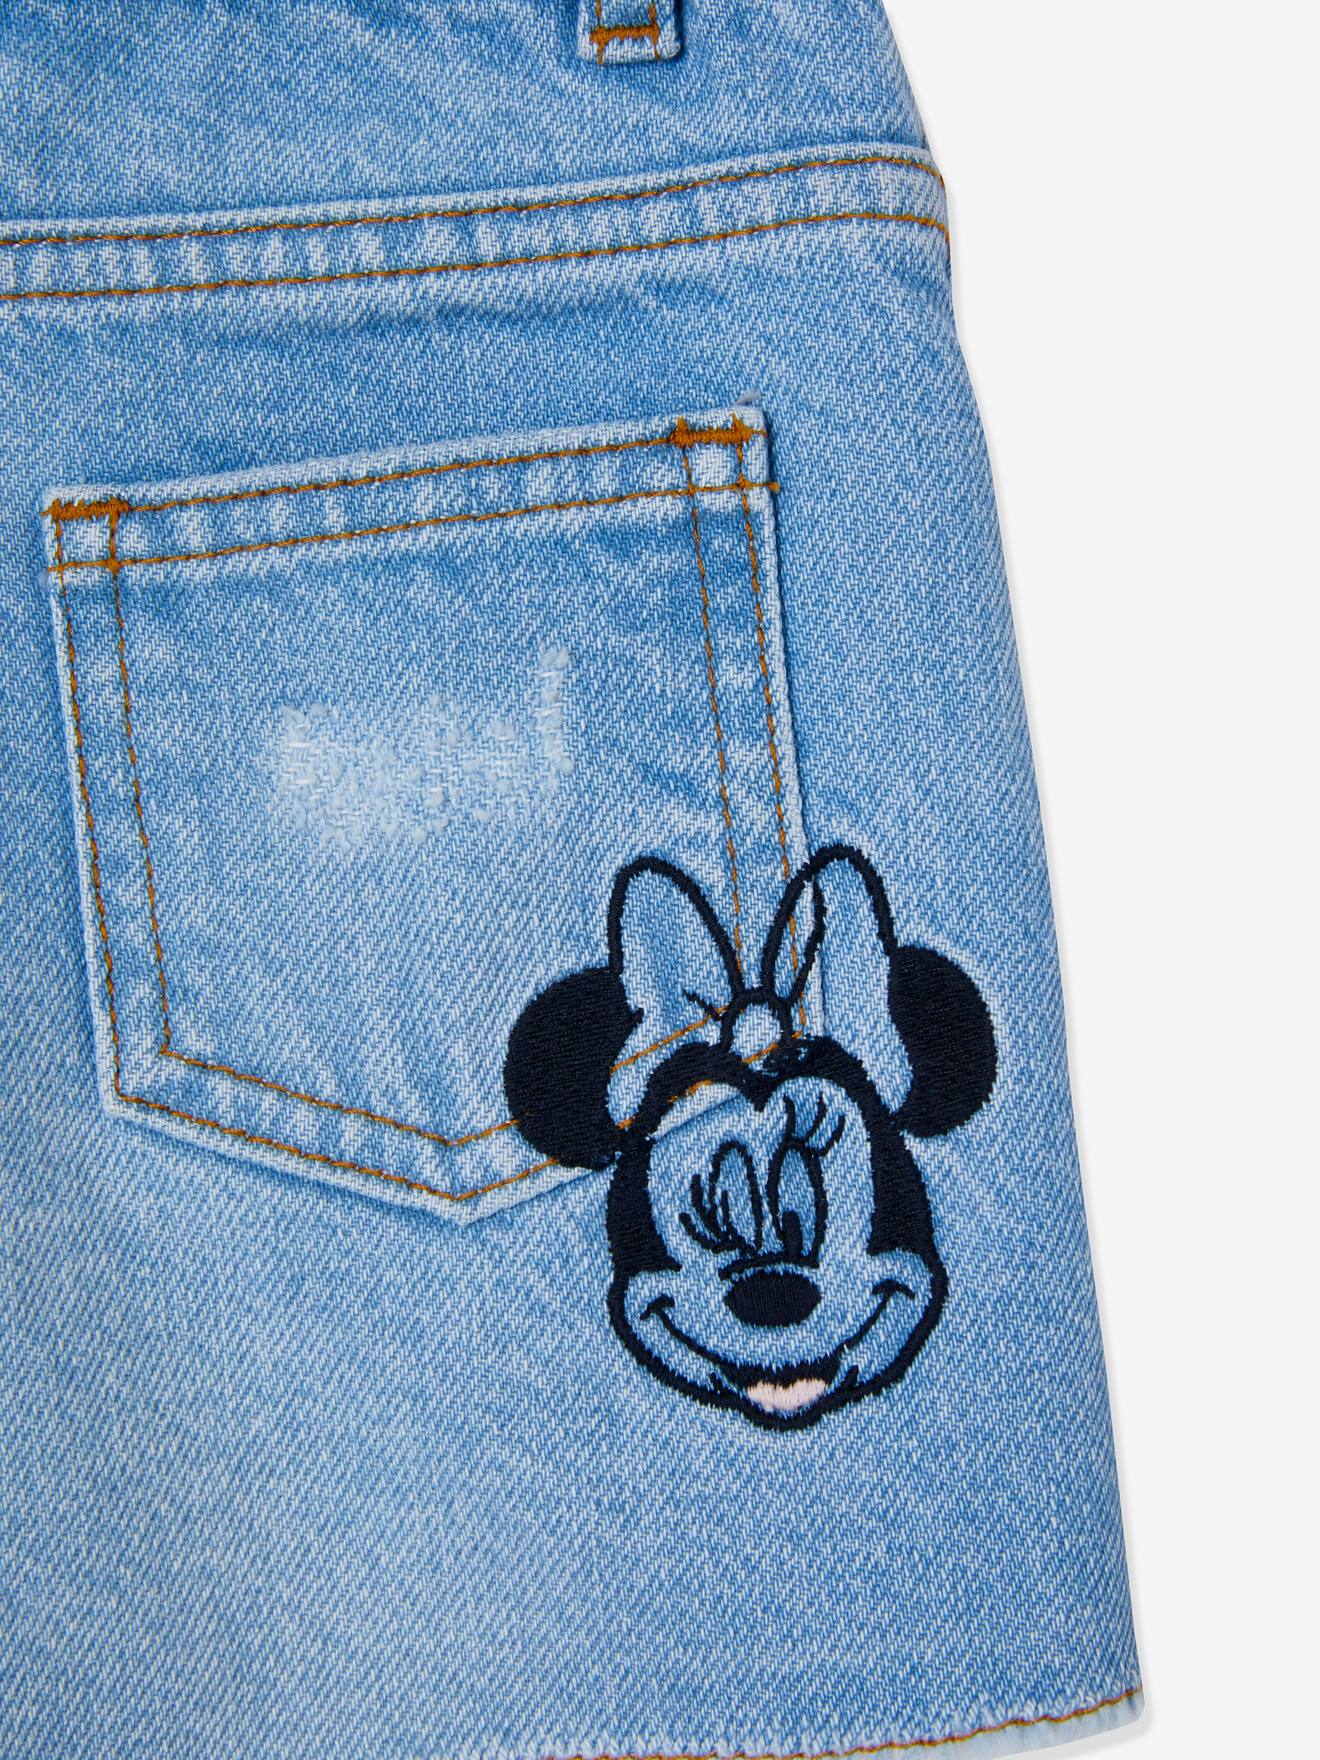 Embroidered Disney Minnie Mouse® Shorts in Denim, for Girls